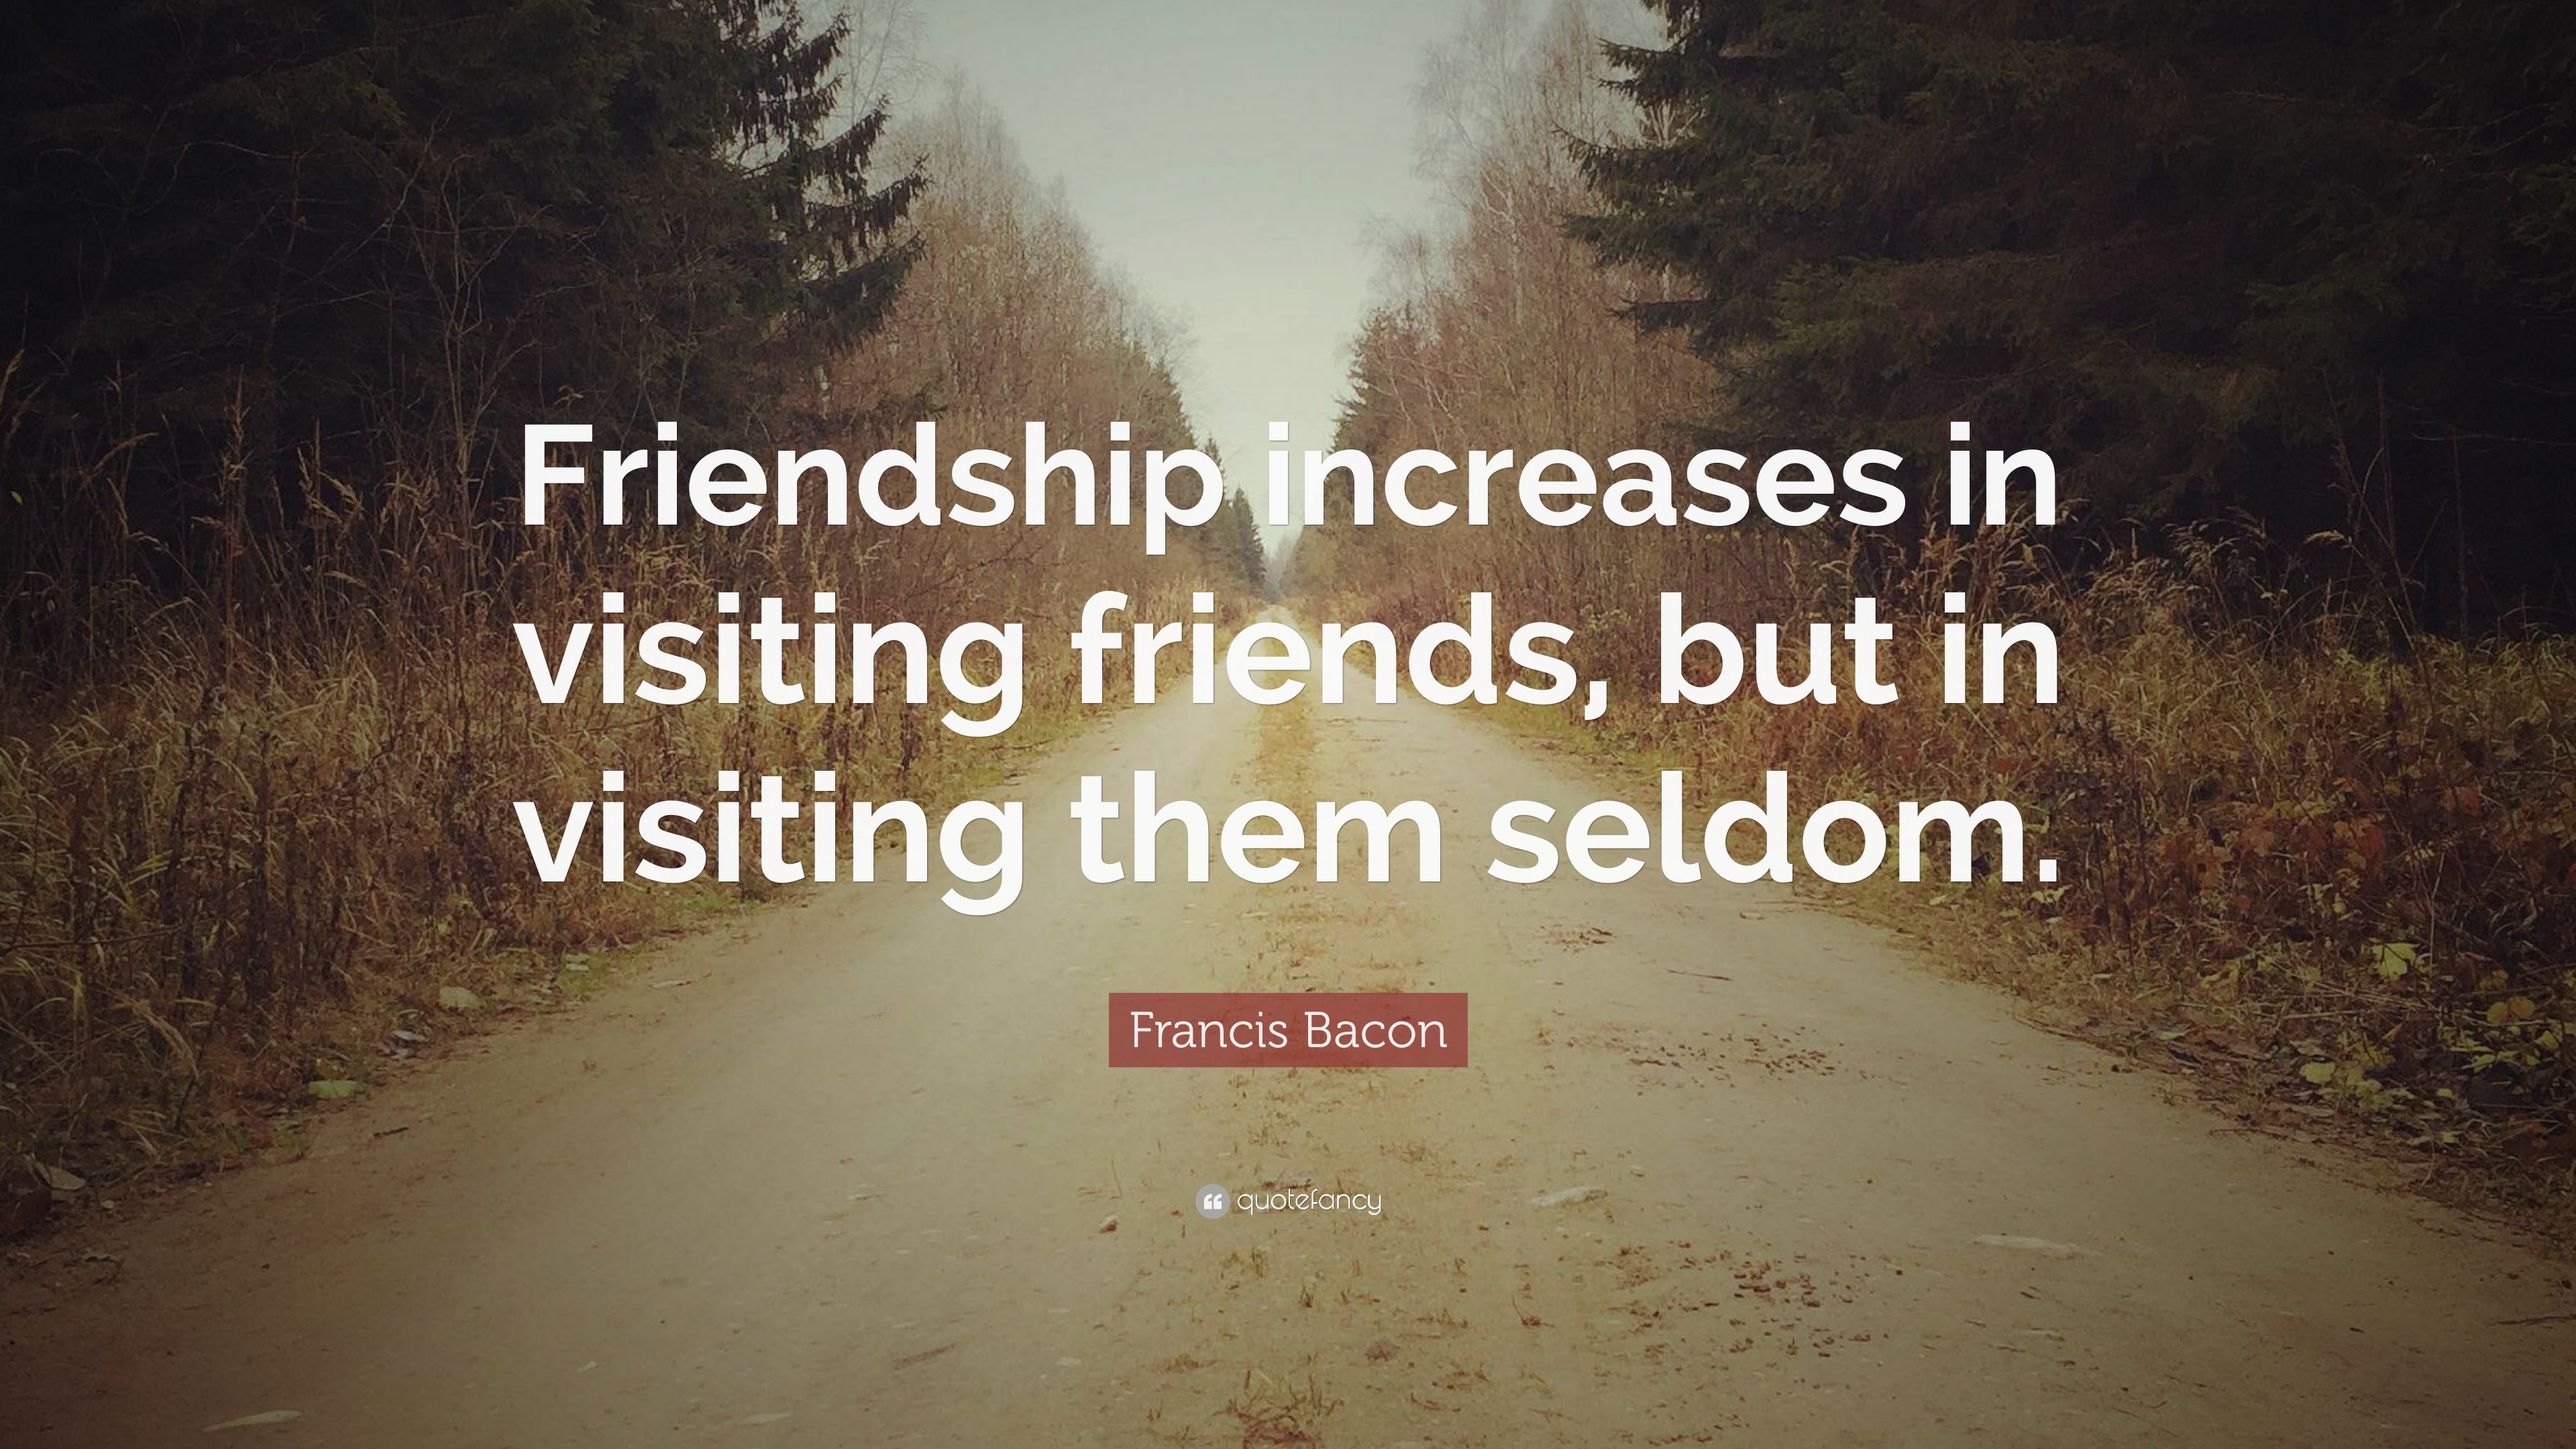 Francis Bacon Quote: “Friendship increases in visiting friends, but in